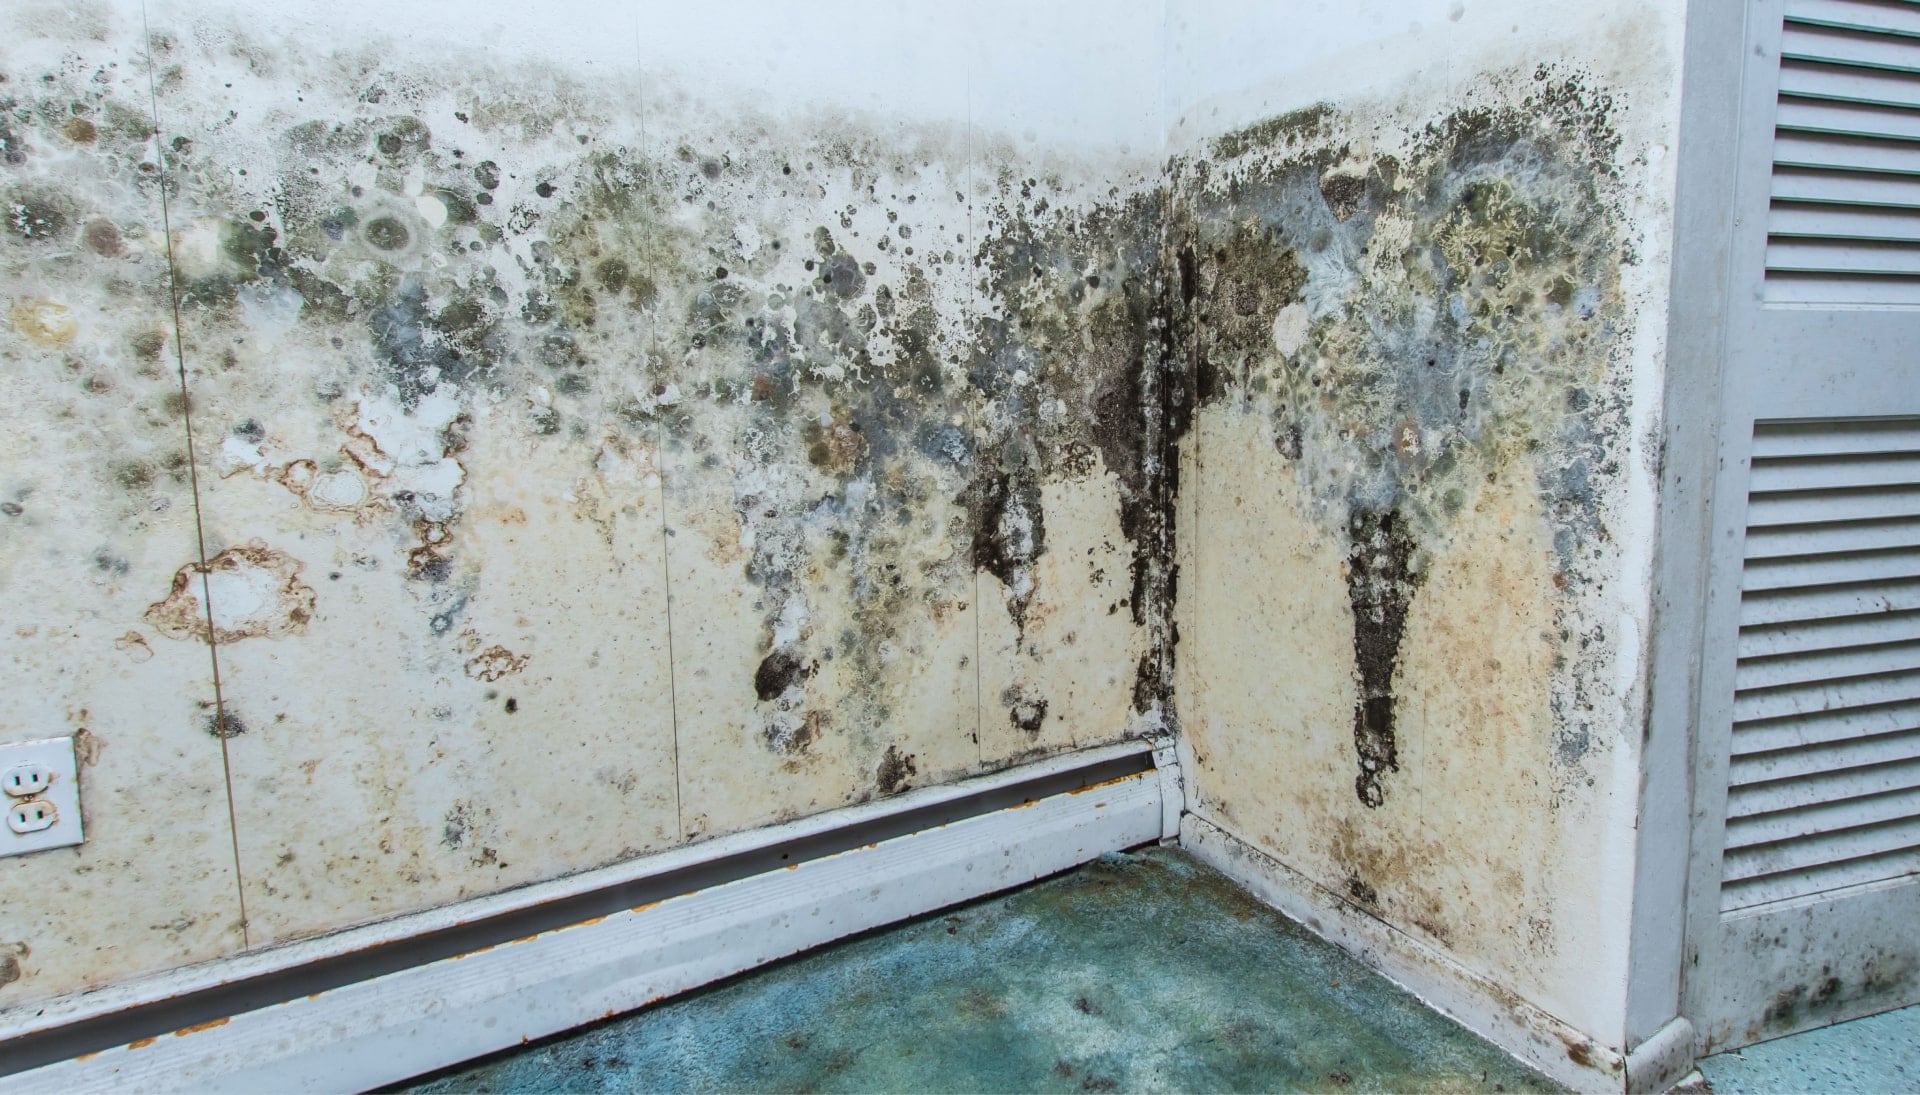 A mold remediation team using specialized techniques to remove mold damage and control odors in a Little Rock property, with a focus on safety and efficiency